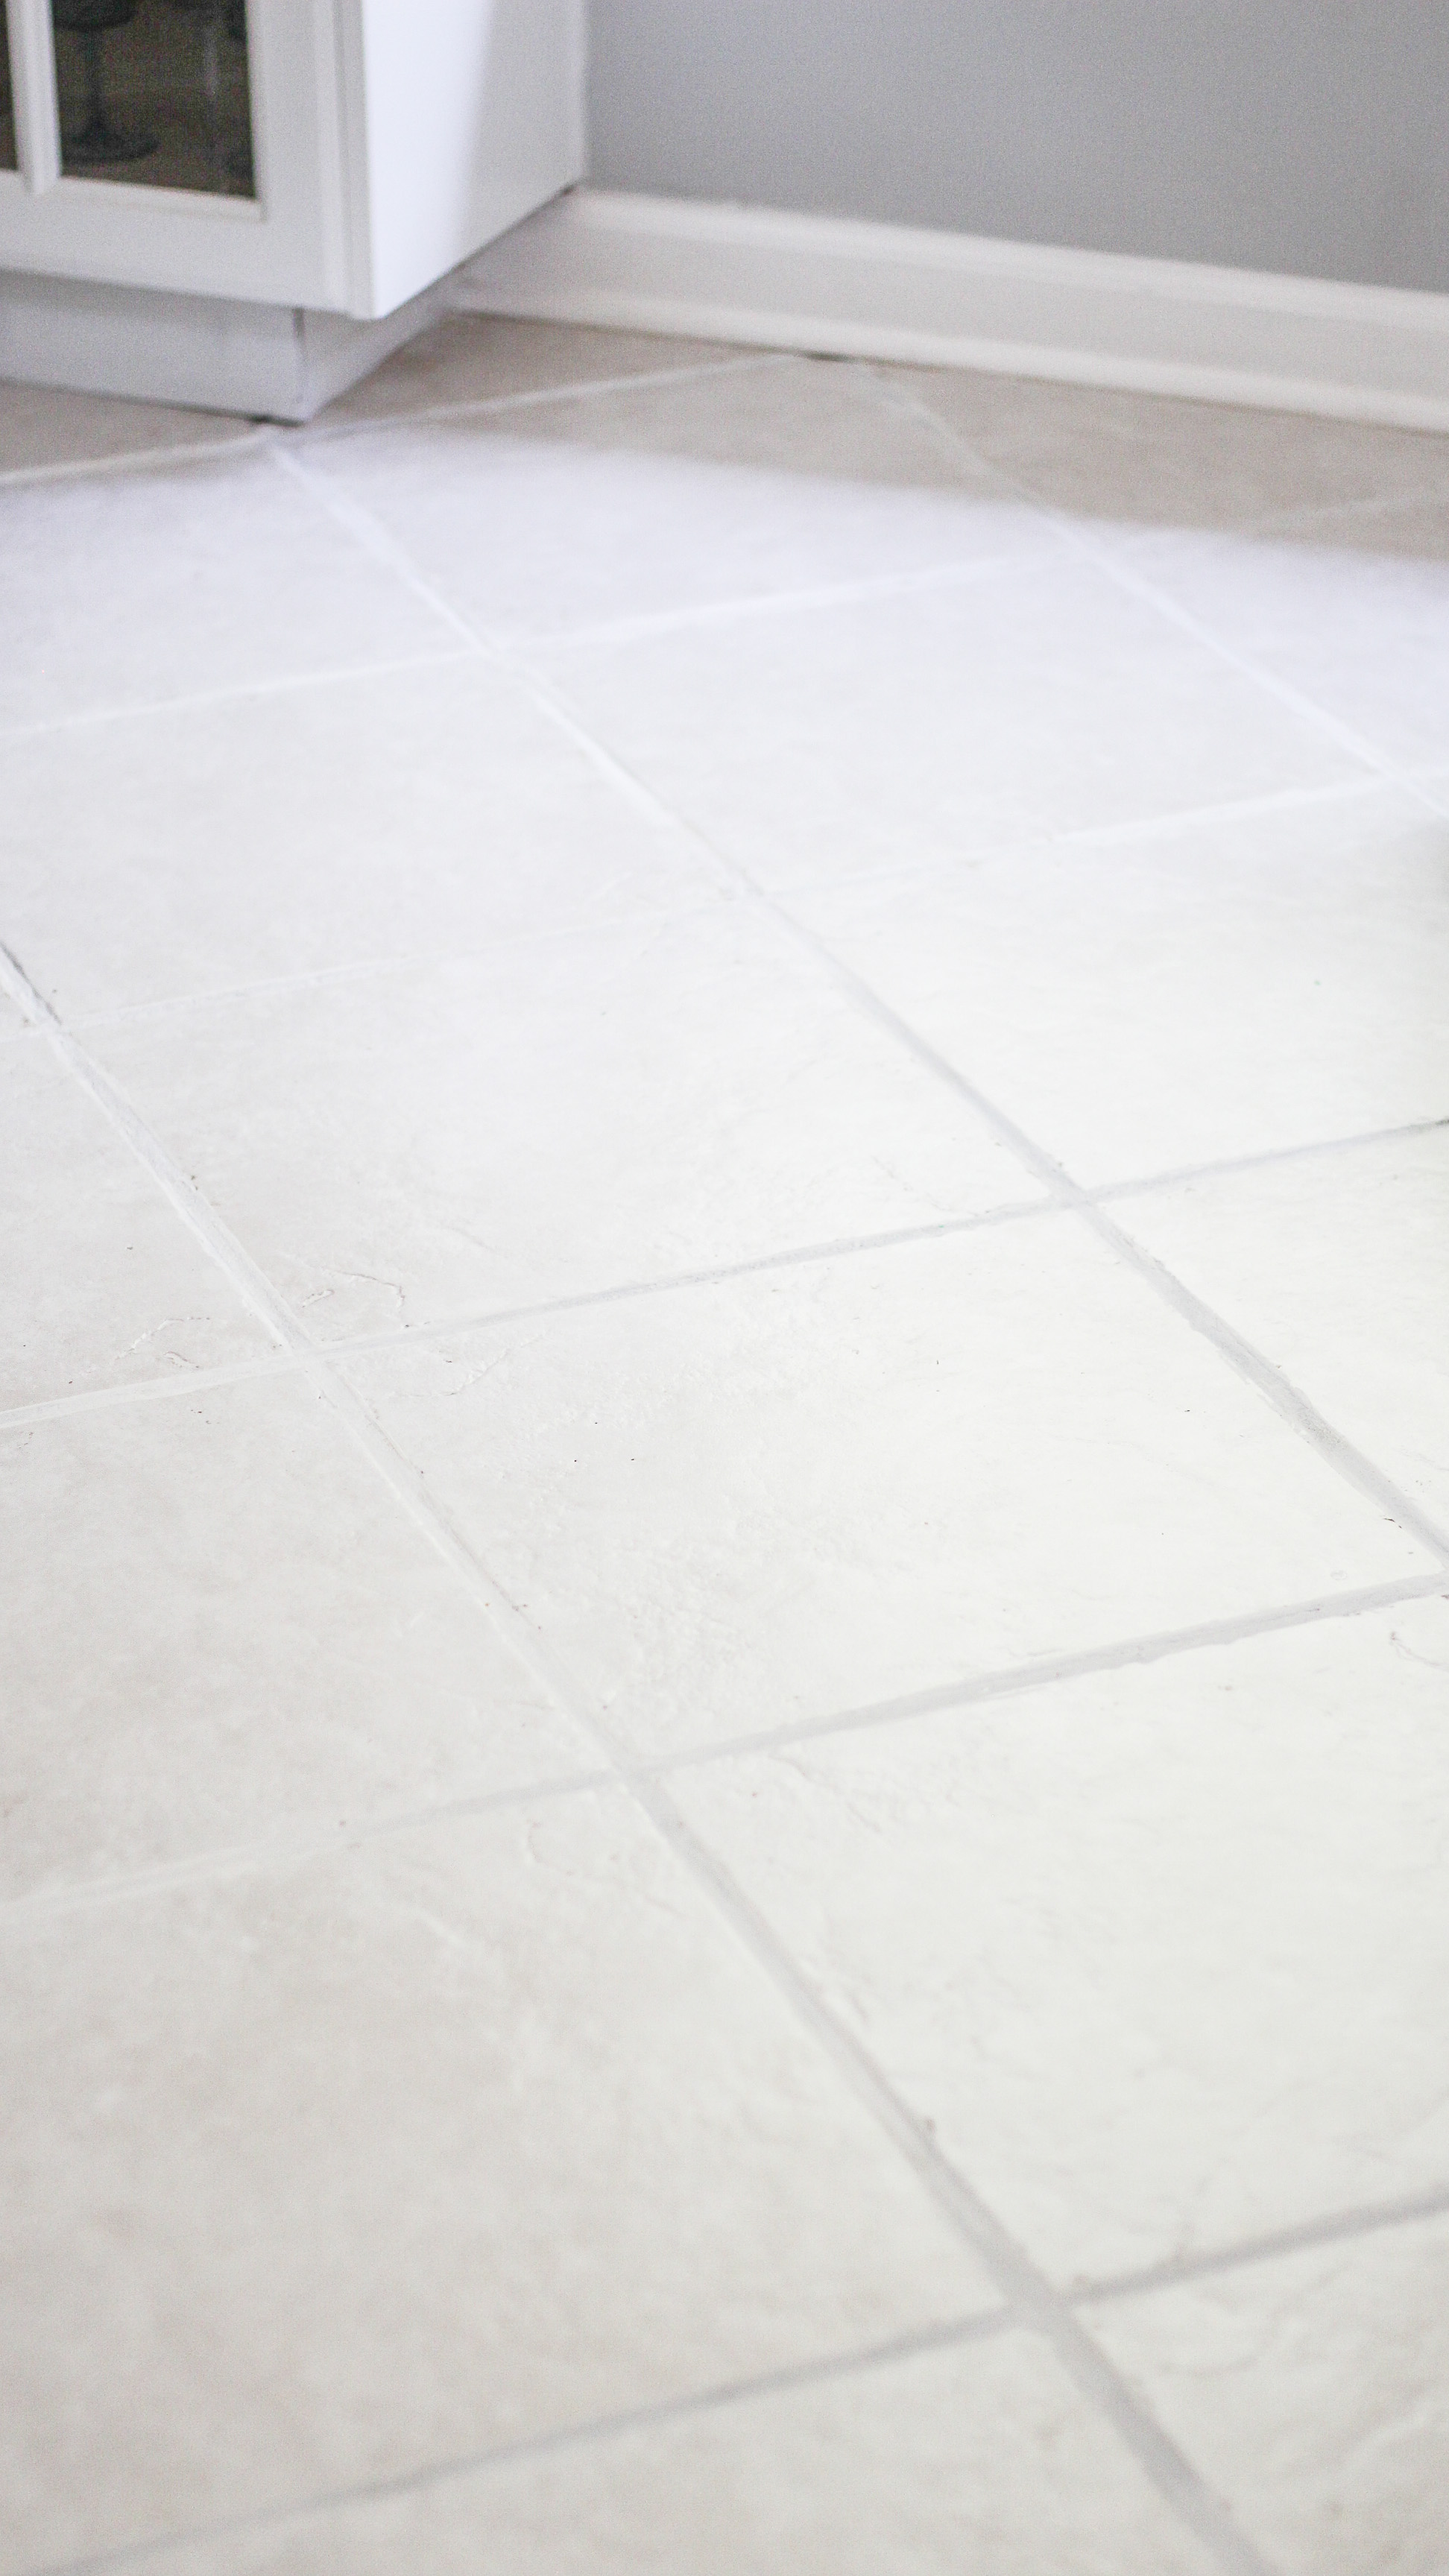 Neglected Tile Flooring, How To Clean Dirty Ceramic Tile And Grout